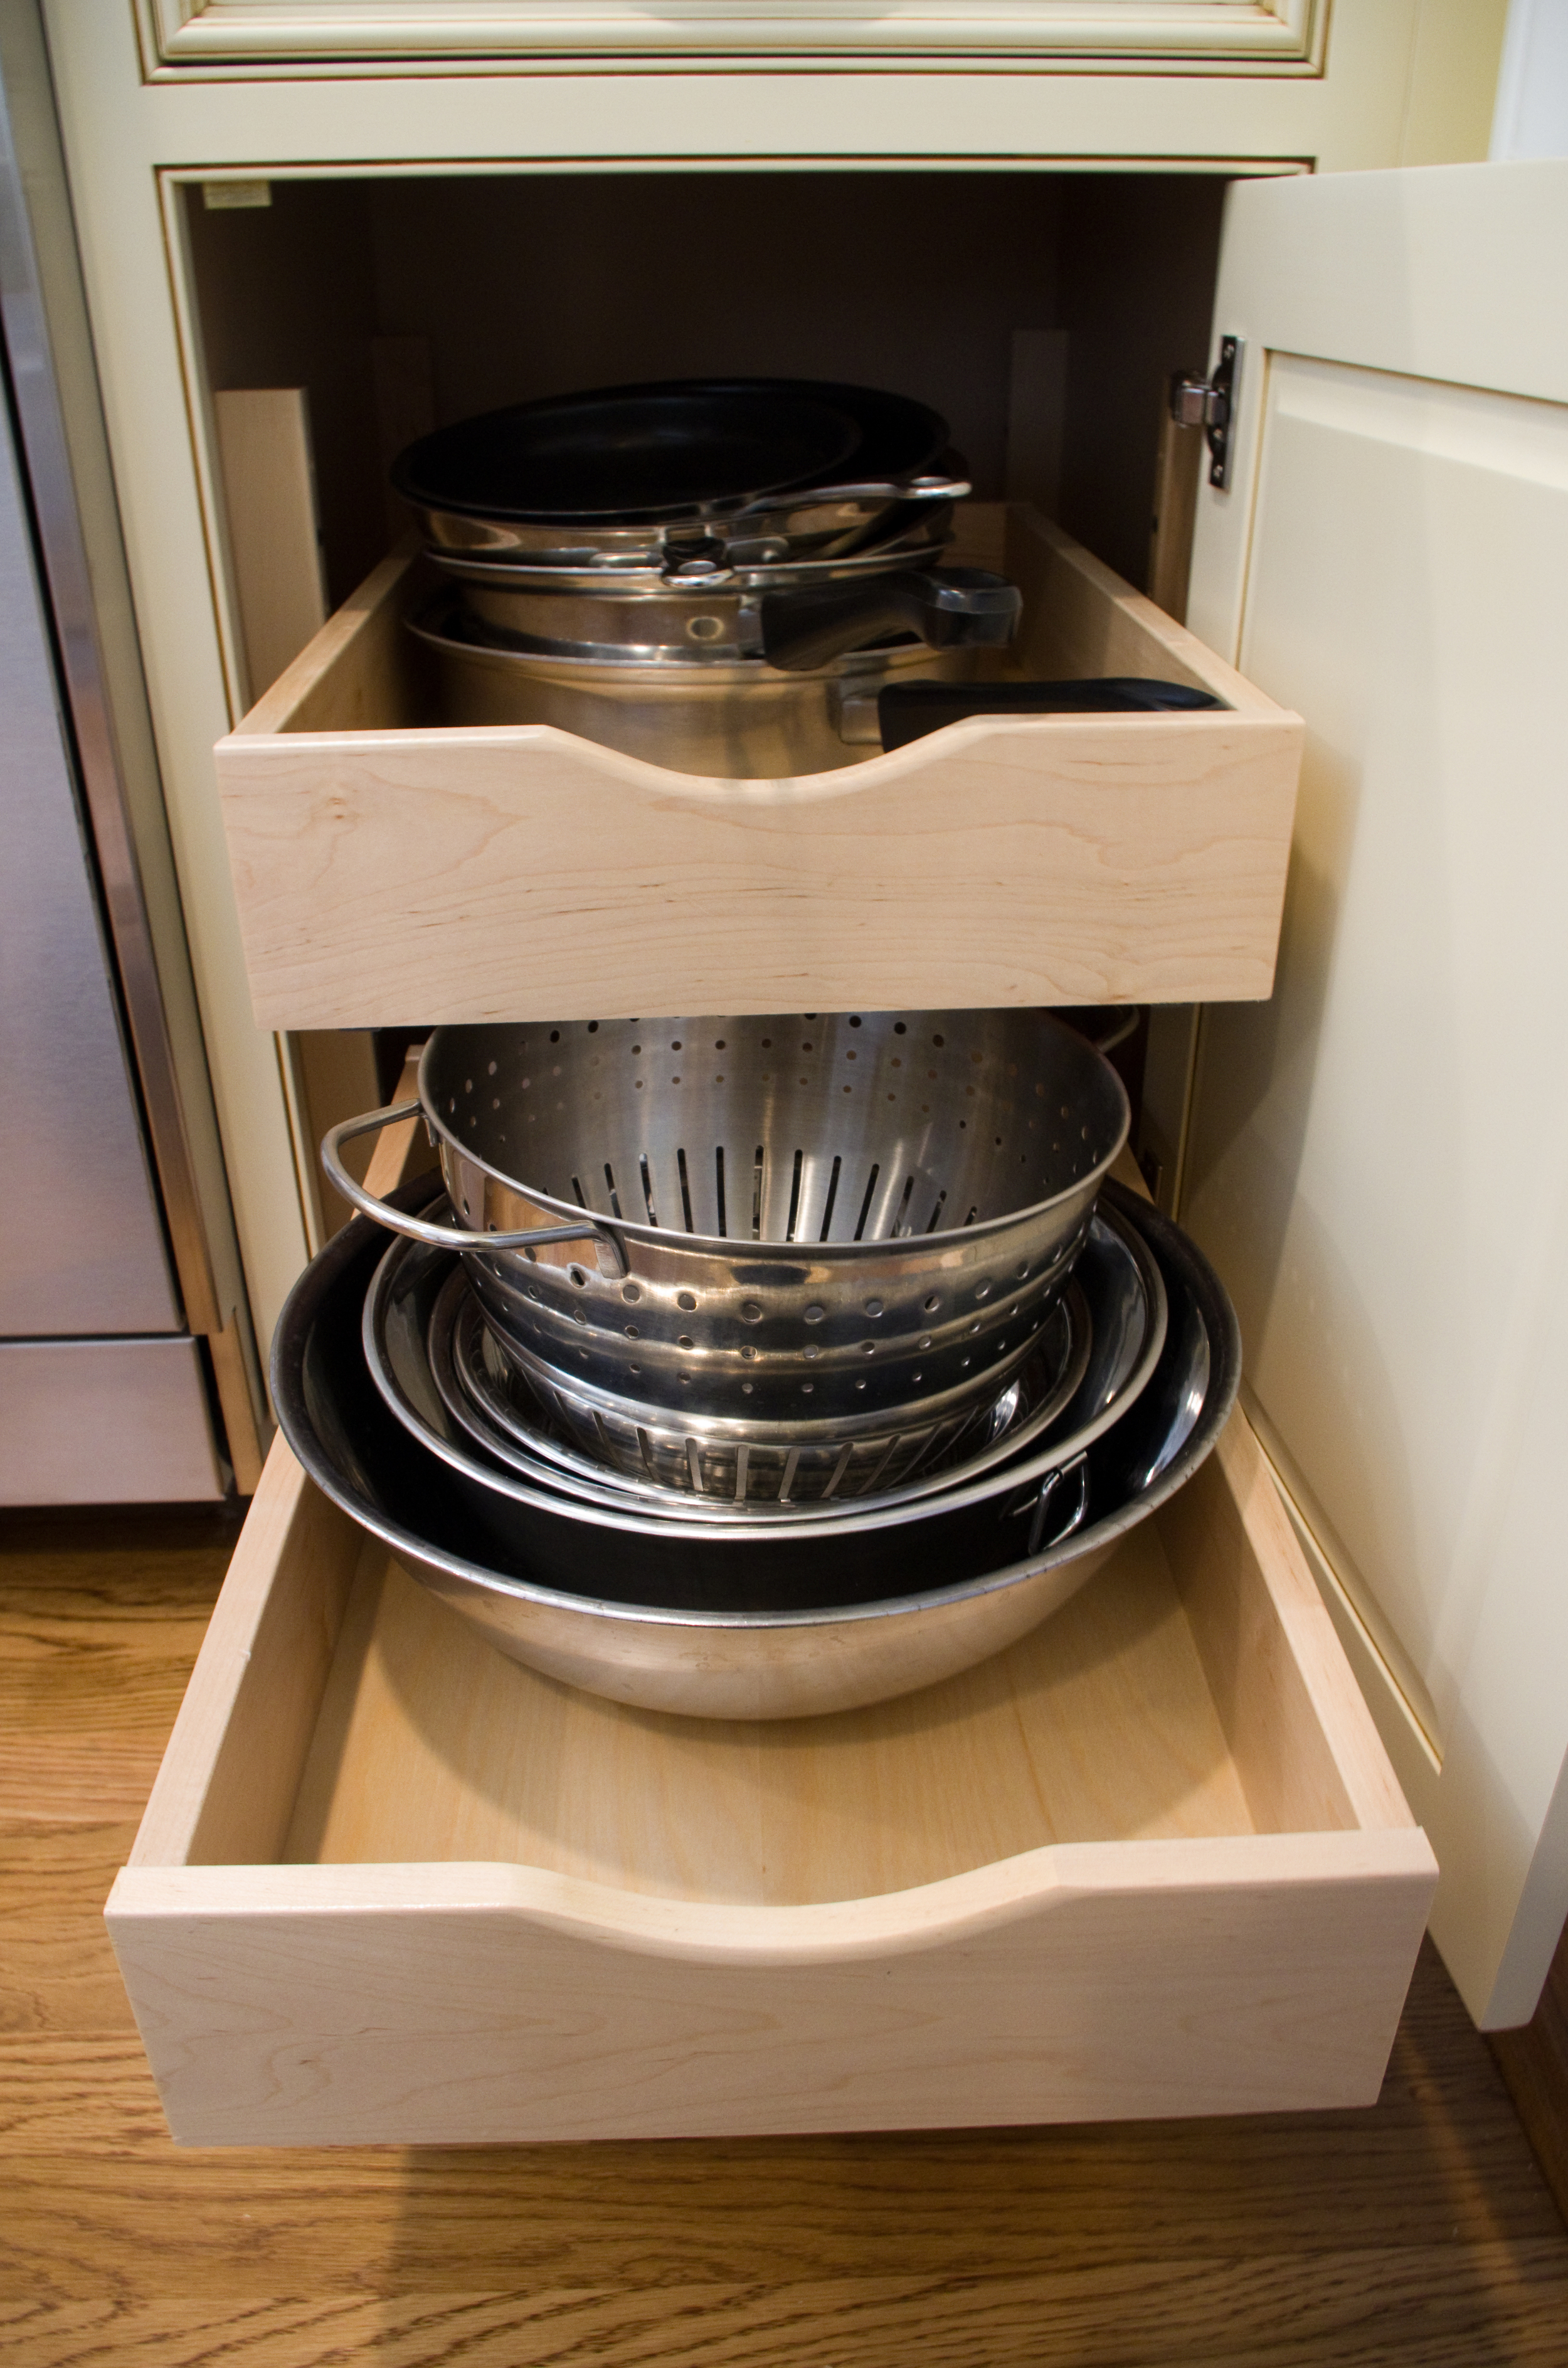 Which Type of Storage Is Best for Your Kitchen?